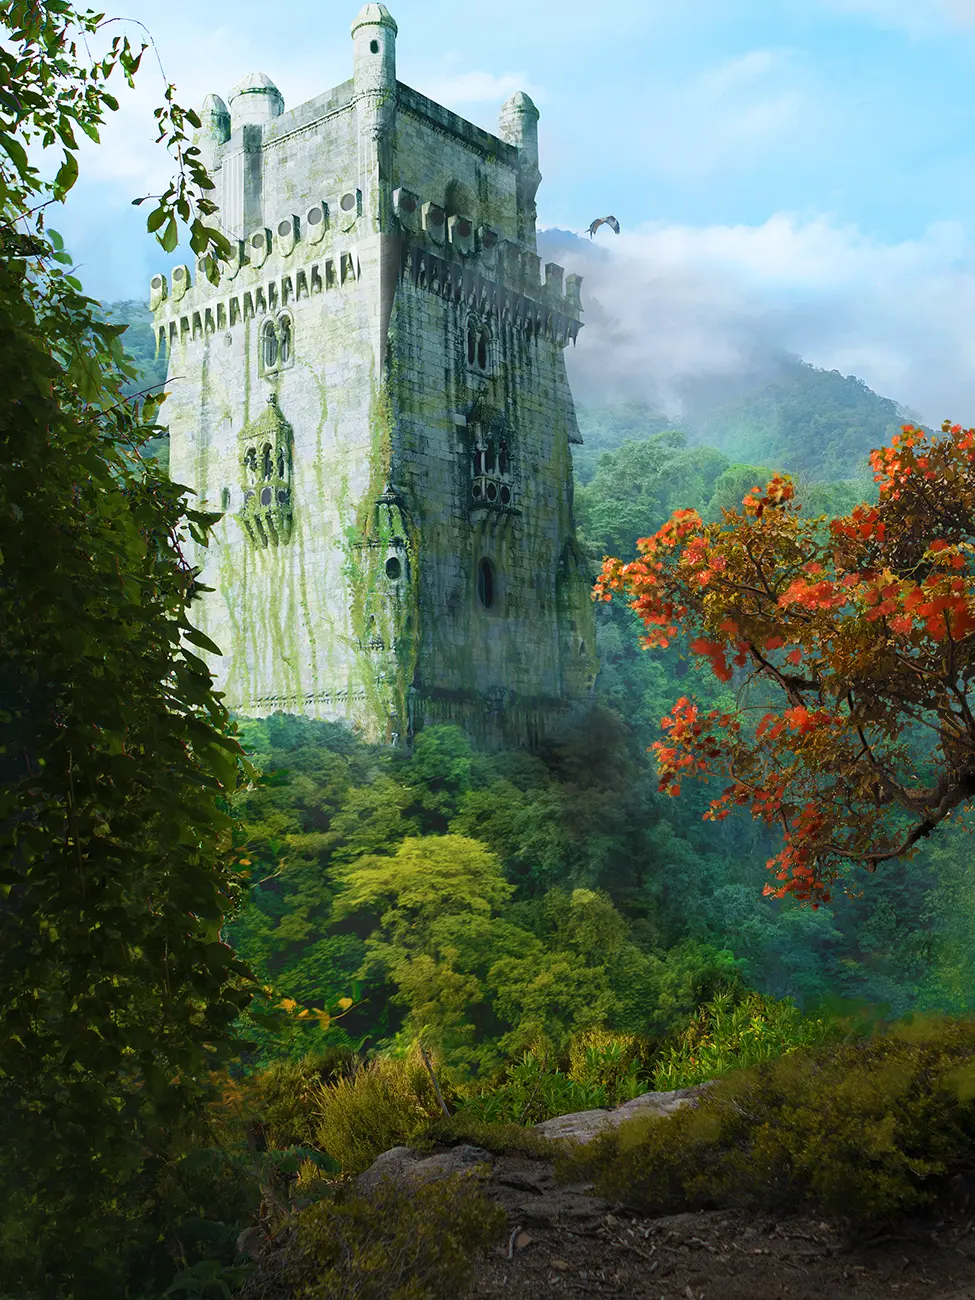 In the early morning of a misty rainforest, an old, large vine-covered stone tower rises from a nearby tree-covered hill.